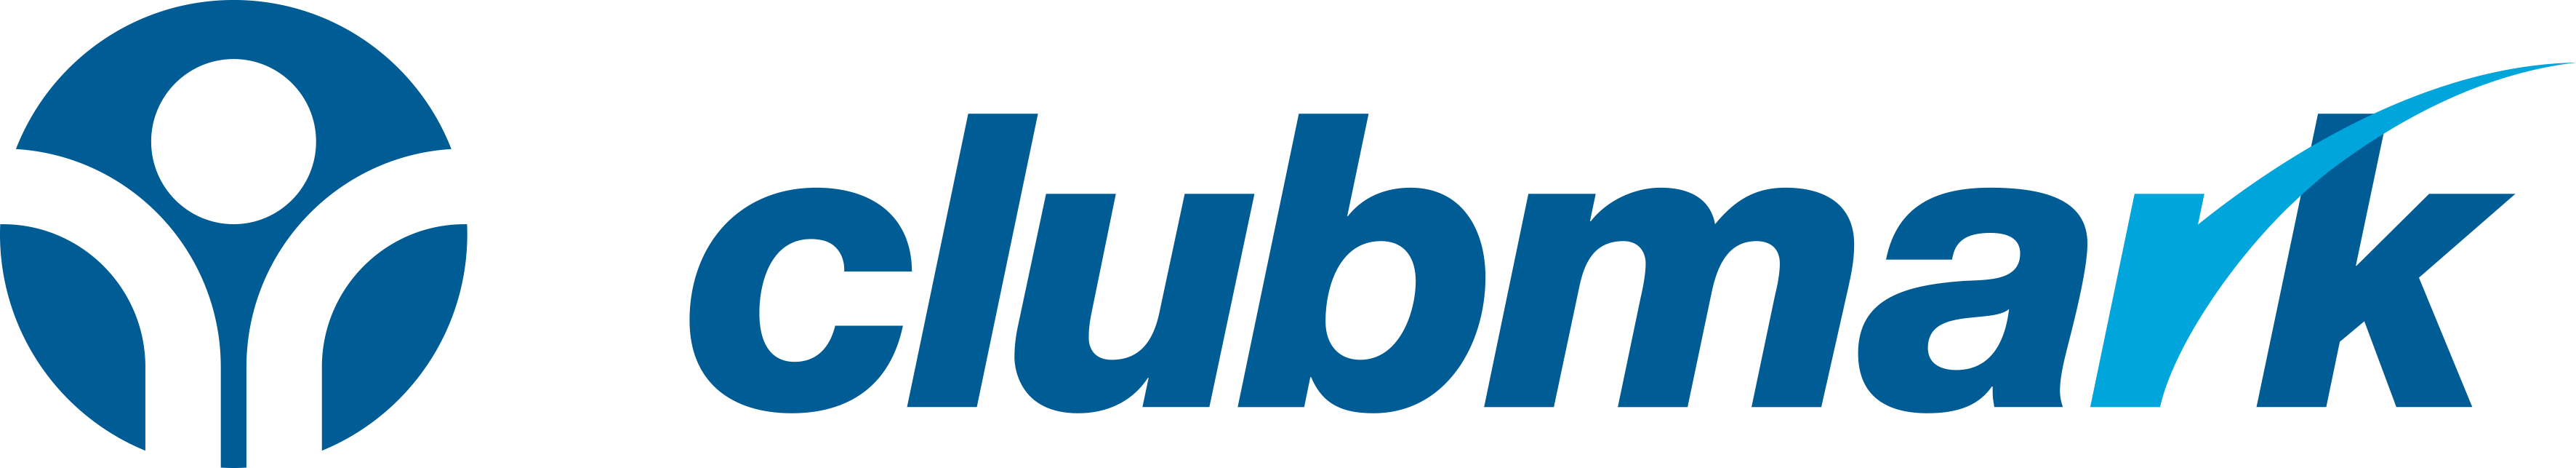 2013-clubmark-logo.png